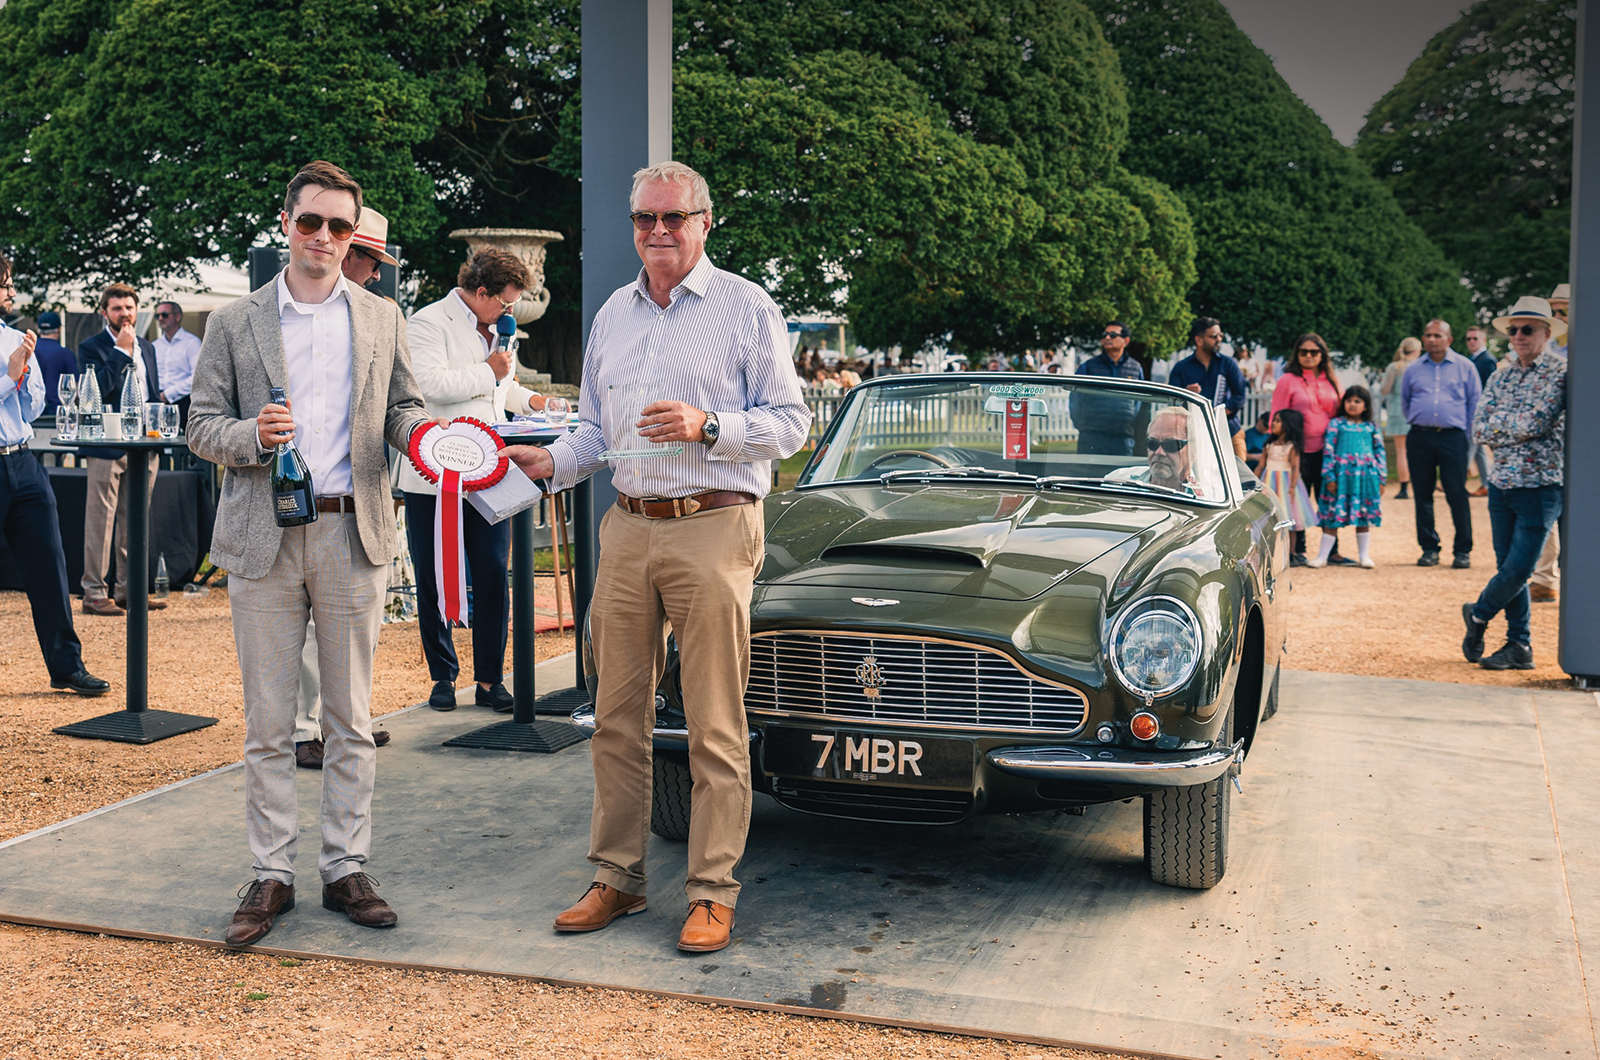 Classic & Sports Car – Get 20% off Concours of Elegance tickets with Classic & Sports Car